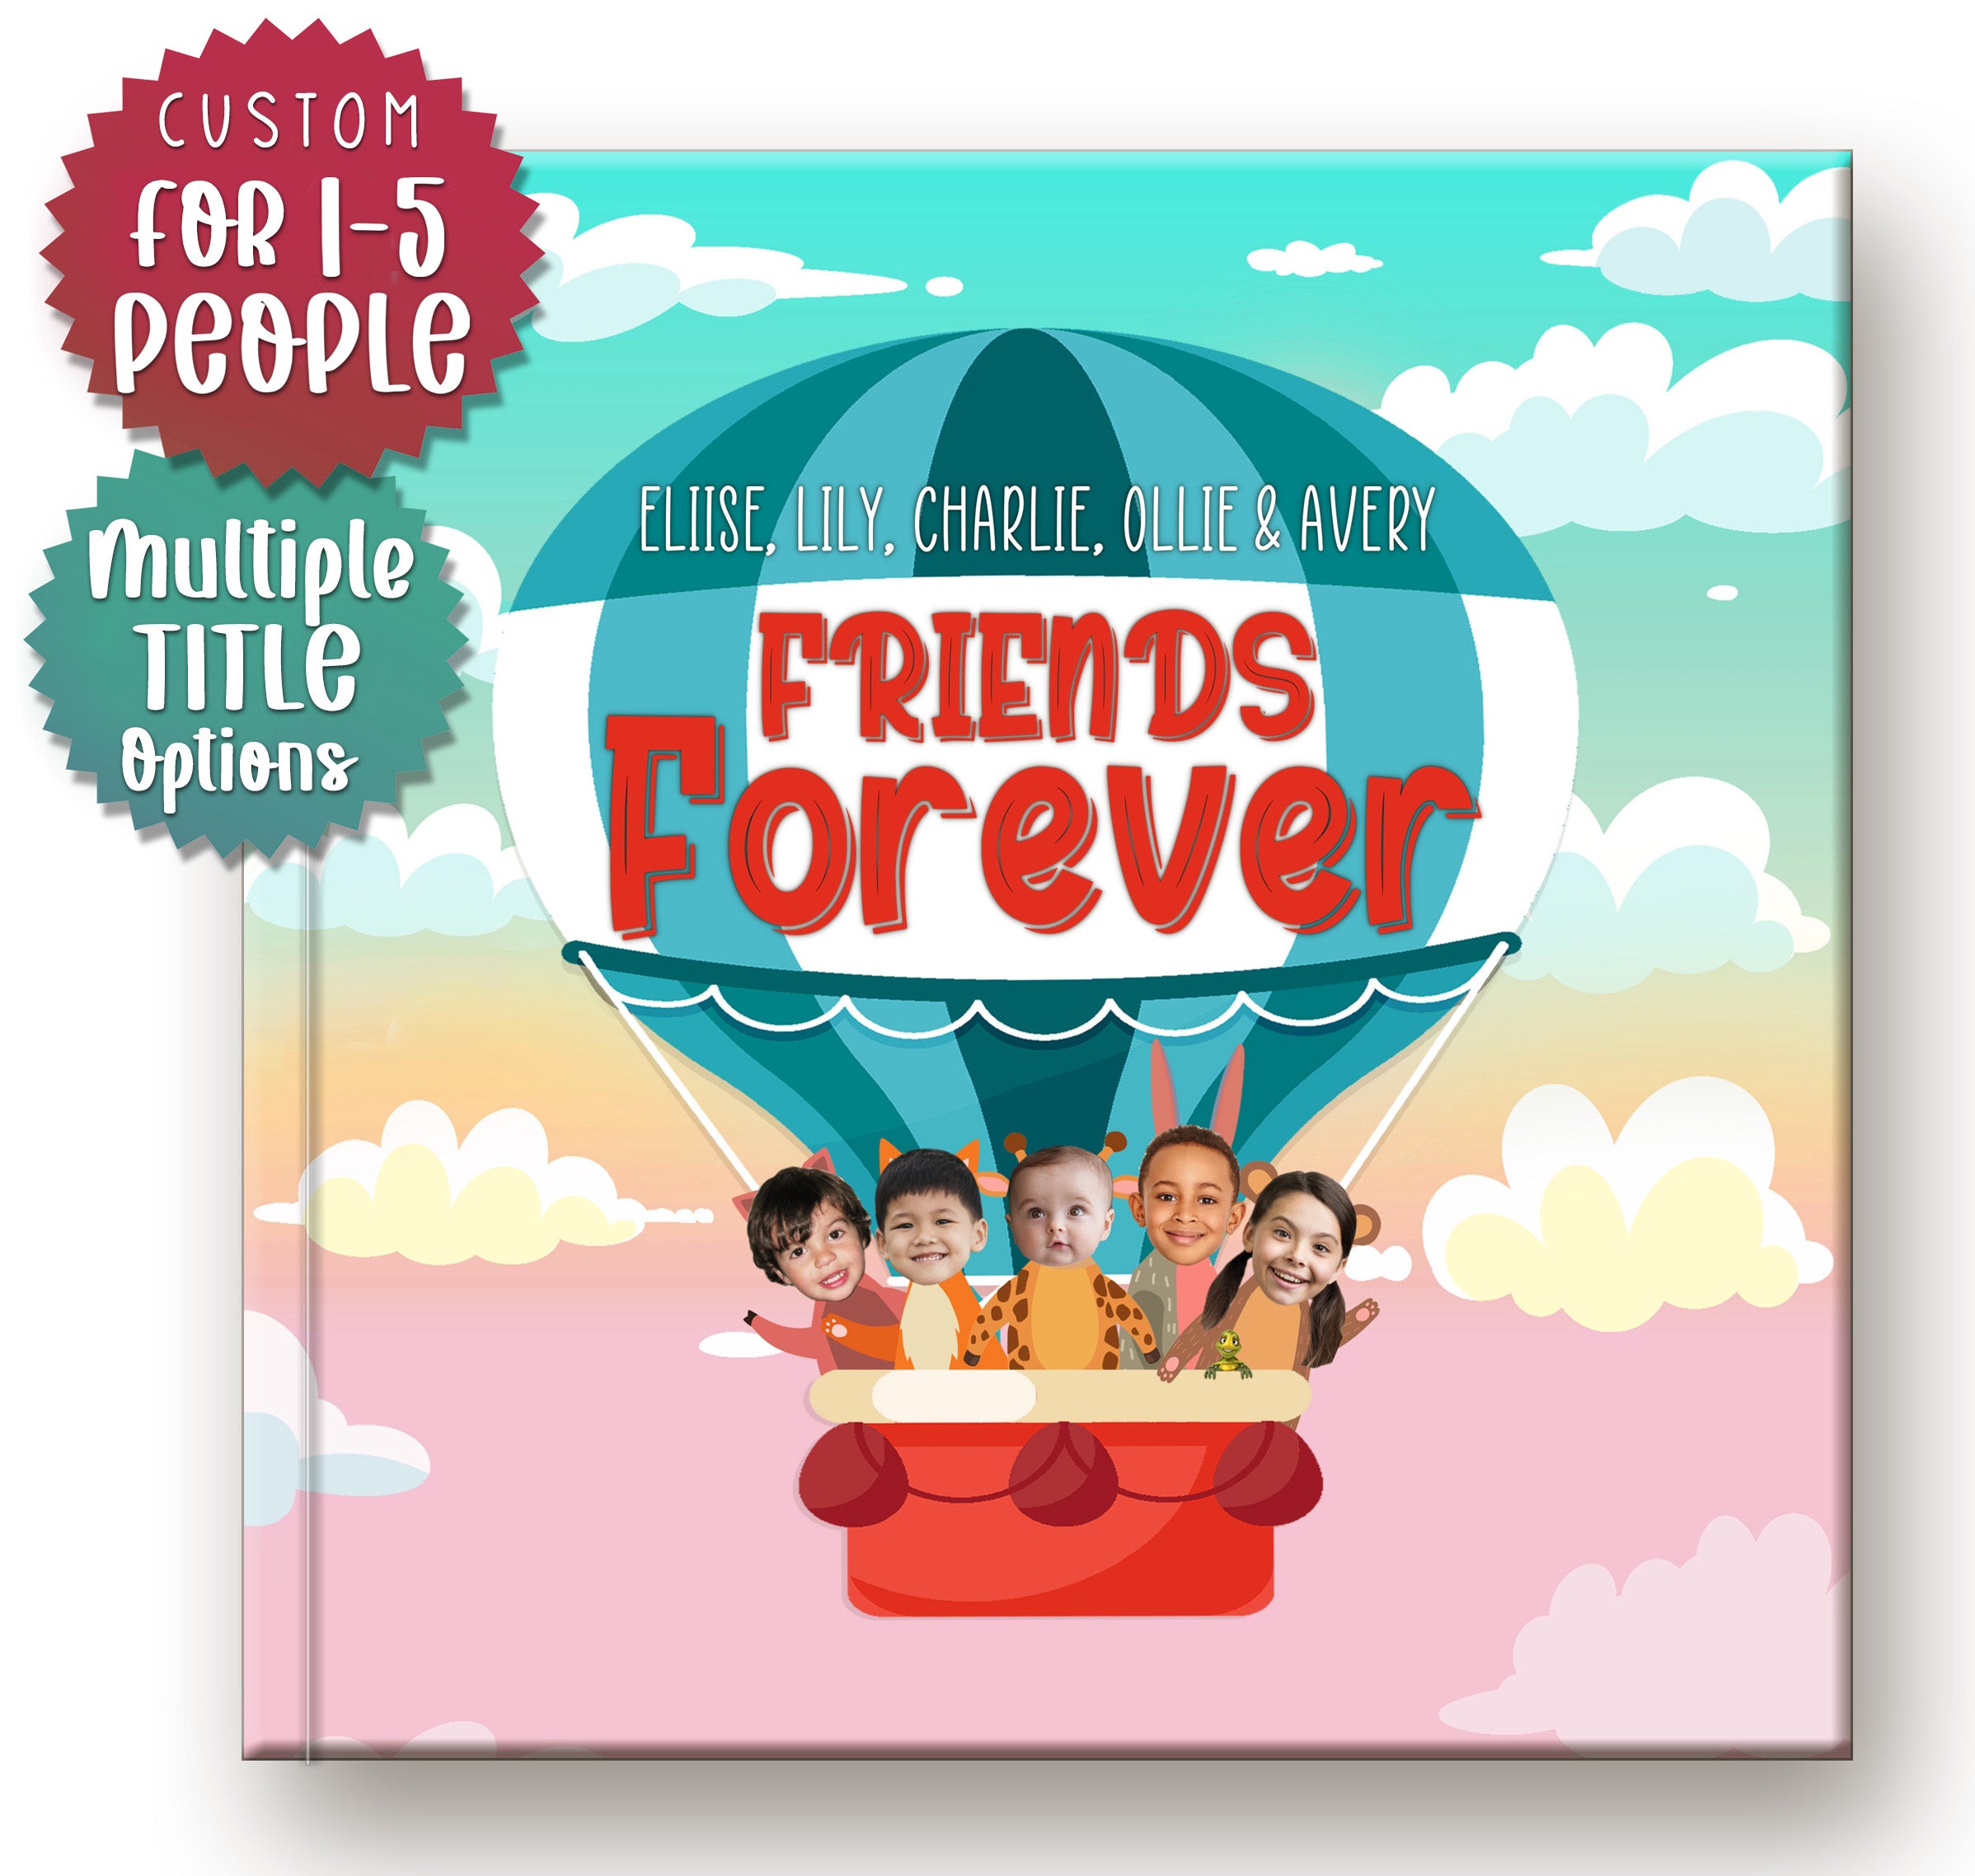 Make Your Own Personalized Books for Family & Friends